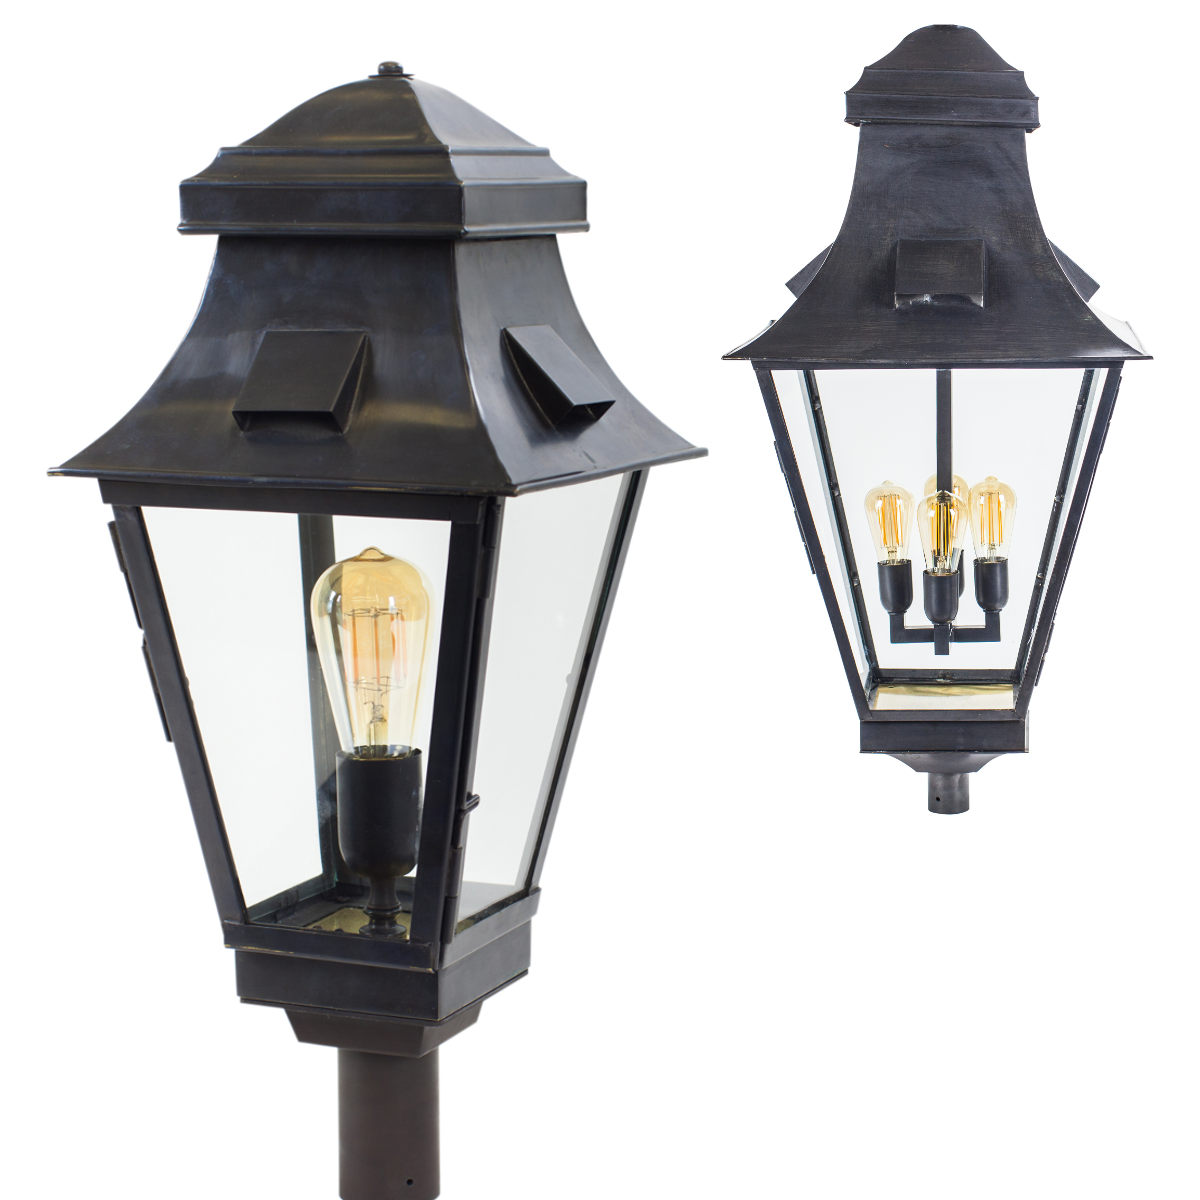 Handcrafted Historical Lantern Gracieuze